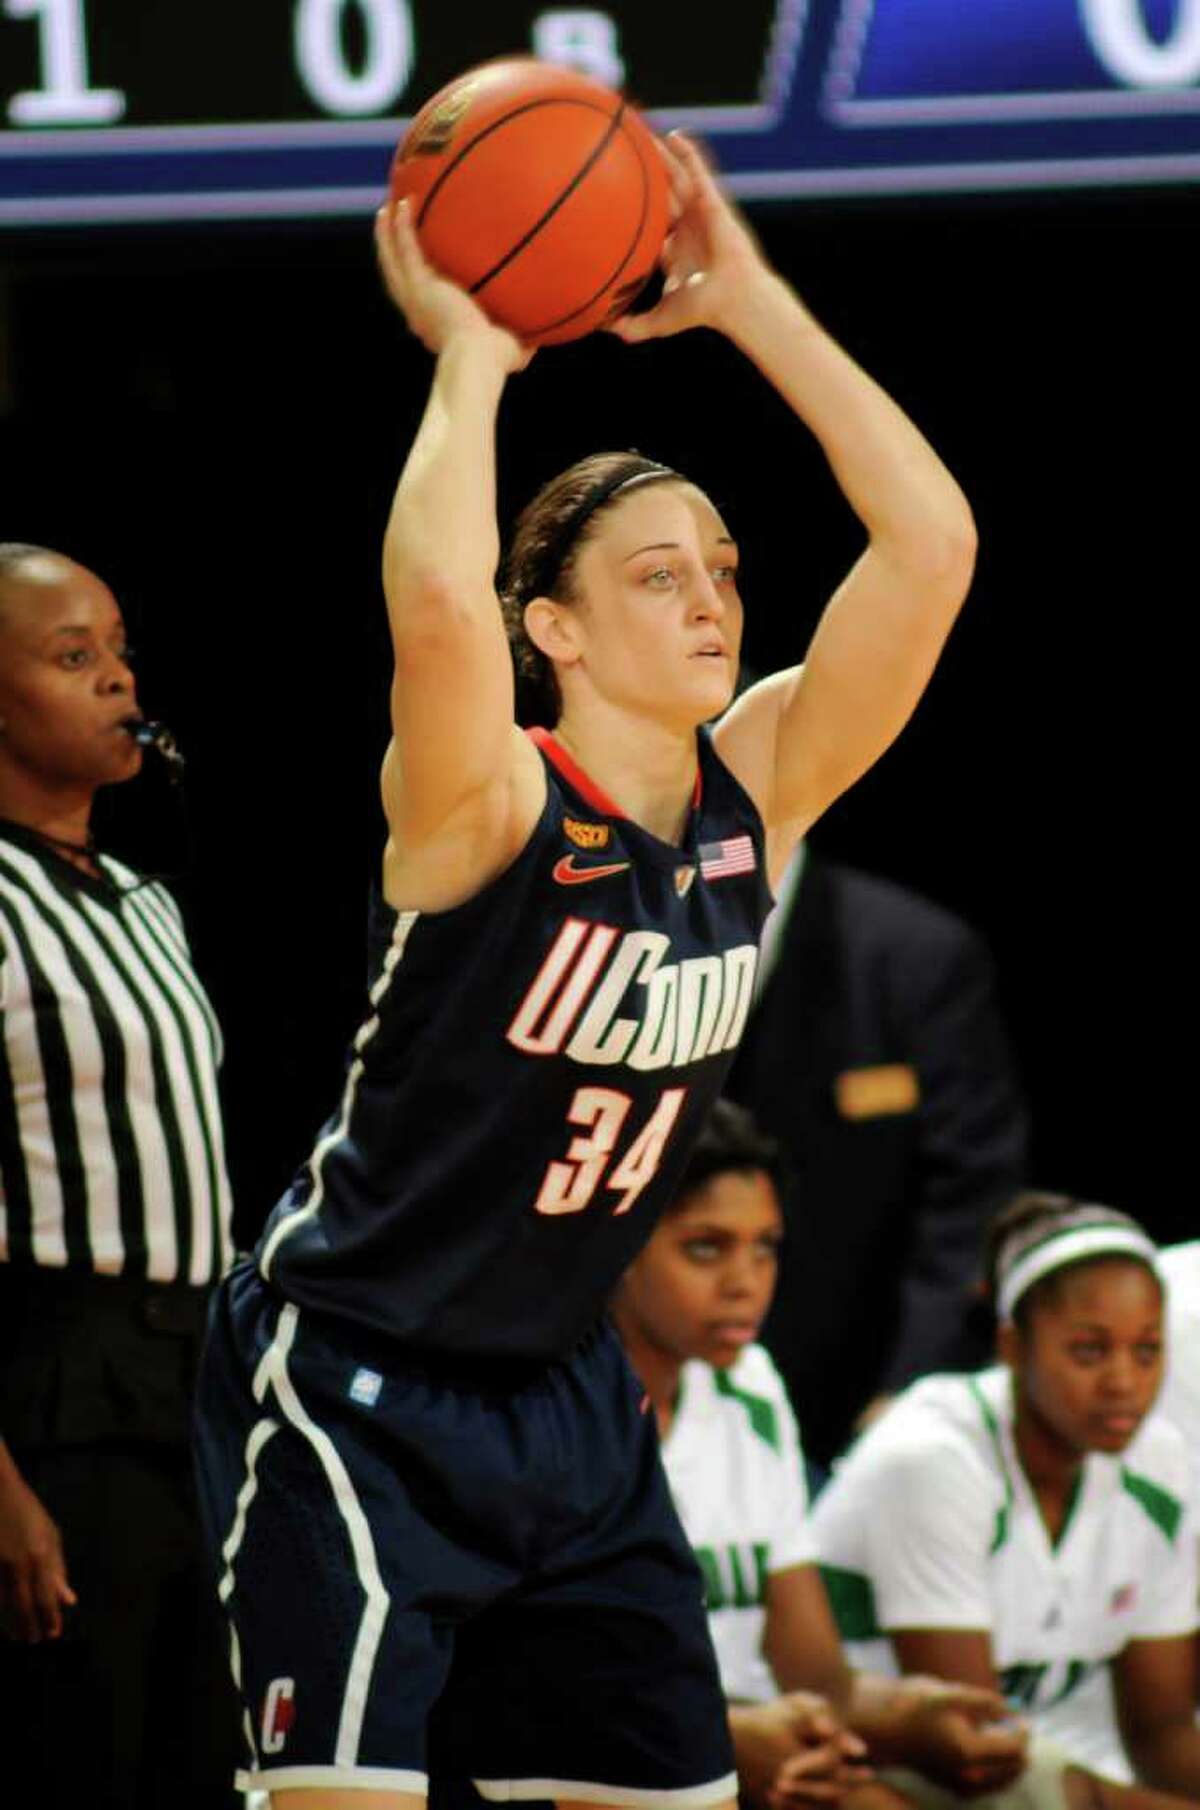 Connecticut guard Kelly Faris throws a pass during the first half of an NCAA college basketball game with Notre Dame, Saturday, Jan. 7, 2012, in South Bend, Ind. (AP Photo/Joe Raymond)